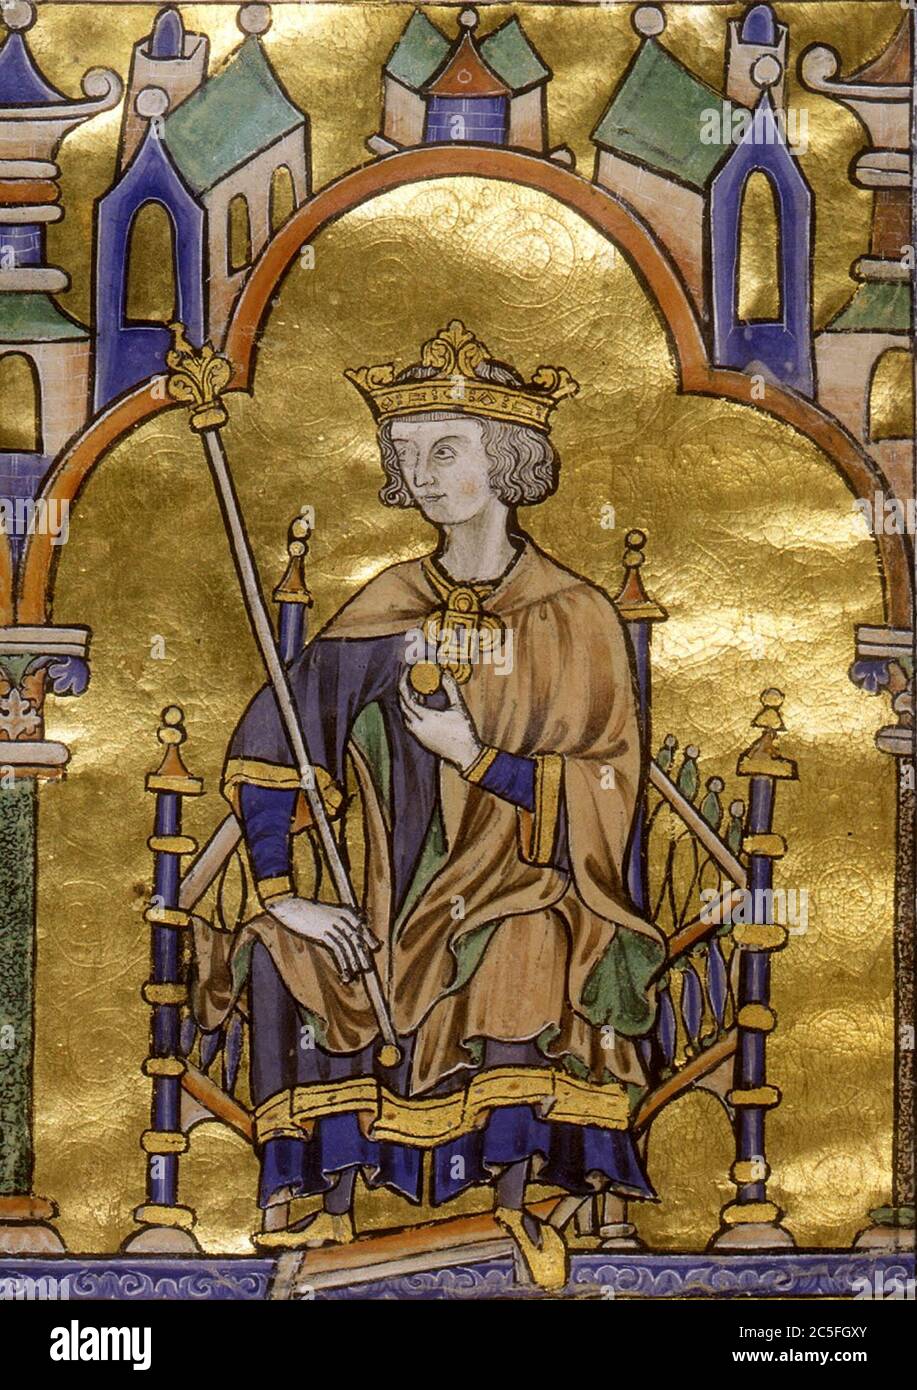 Louis IX (1214 – 1270), commonly known as Saint Louis or Louis the Saint, is the only King of France to be canonized in the Catholic Church. Stock Photo